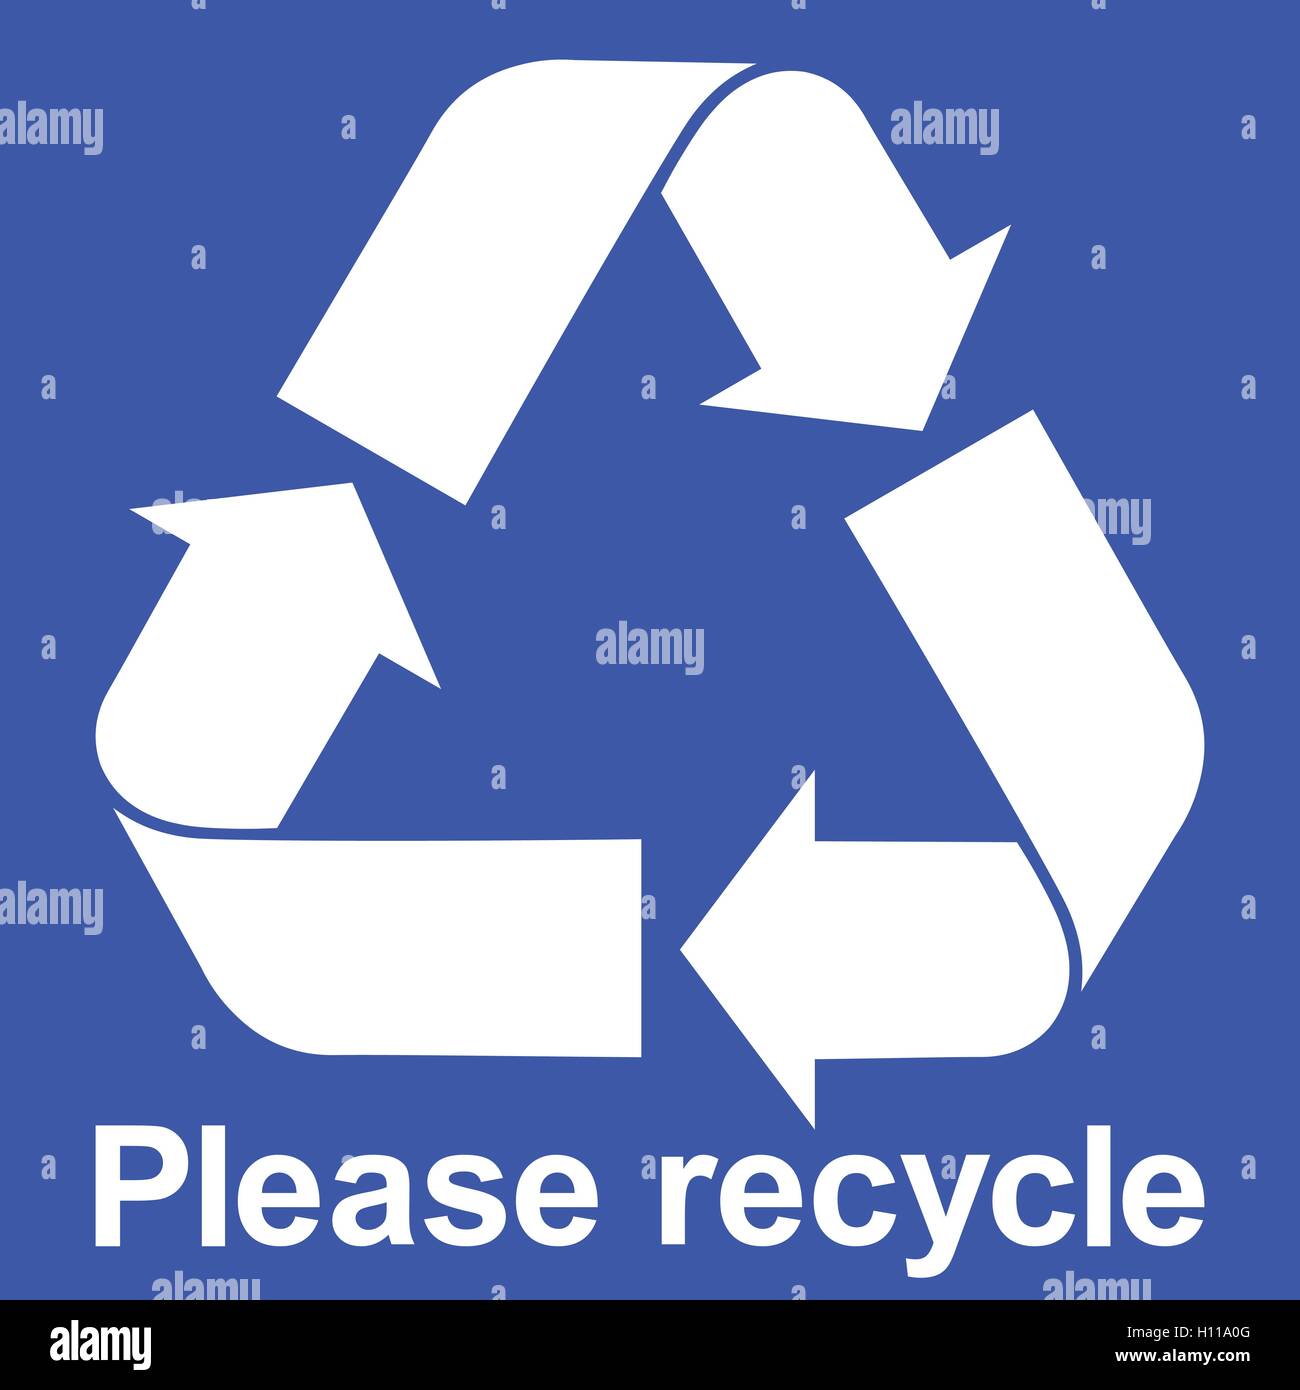 Blue recycling symbol with text Please recycle, isolated blue sign, accurate vector illustration. Stock Vector